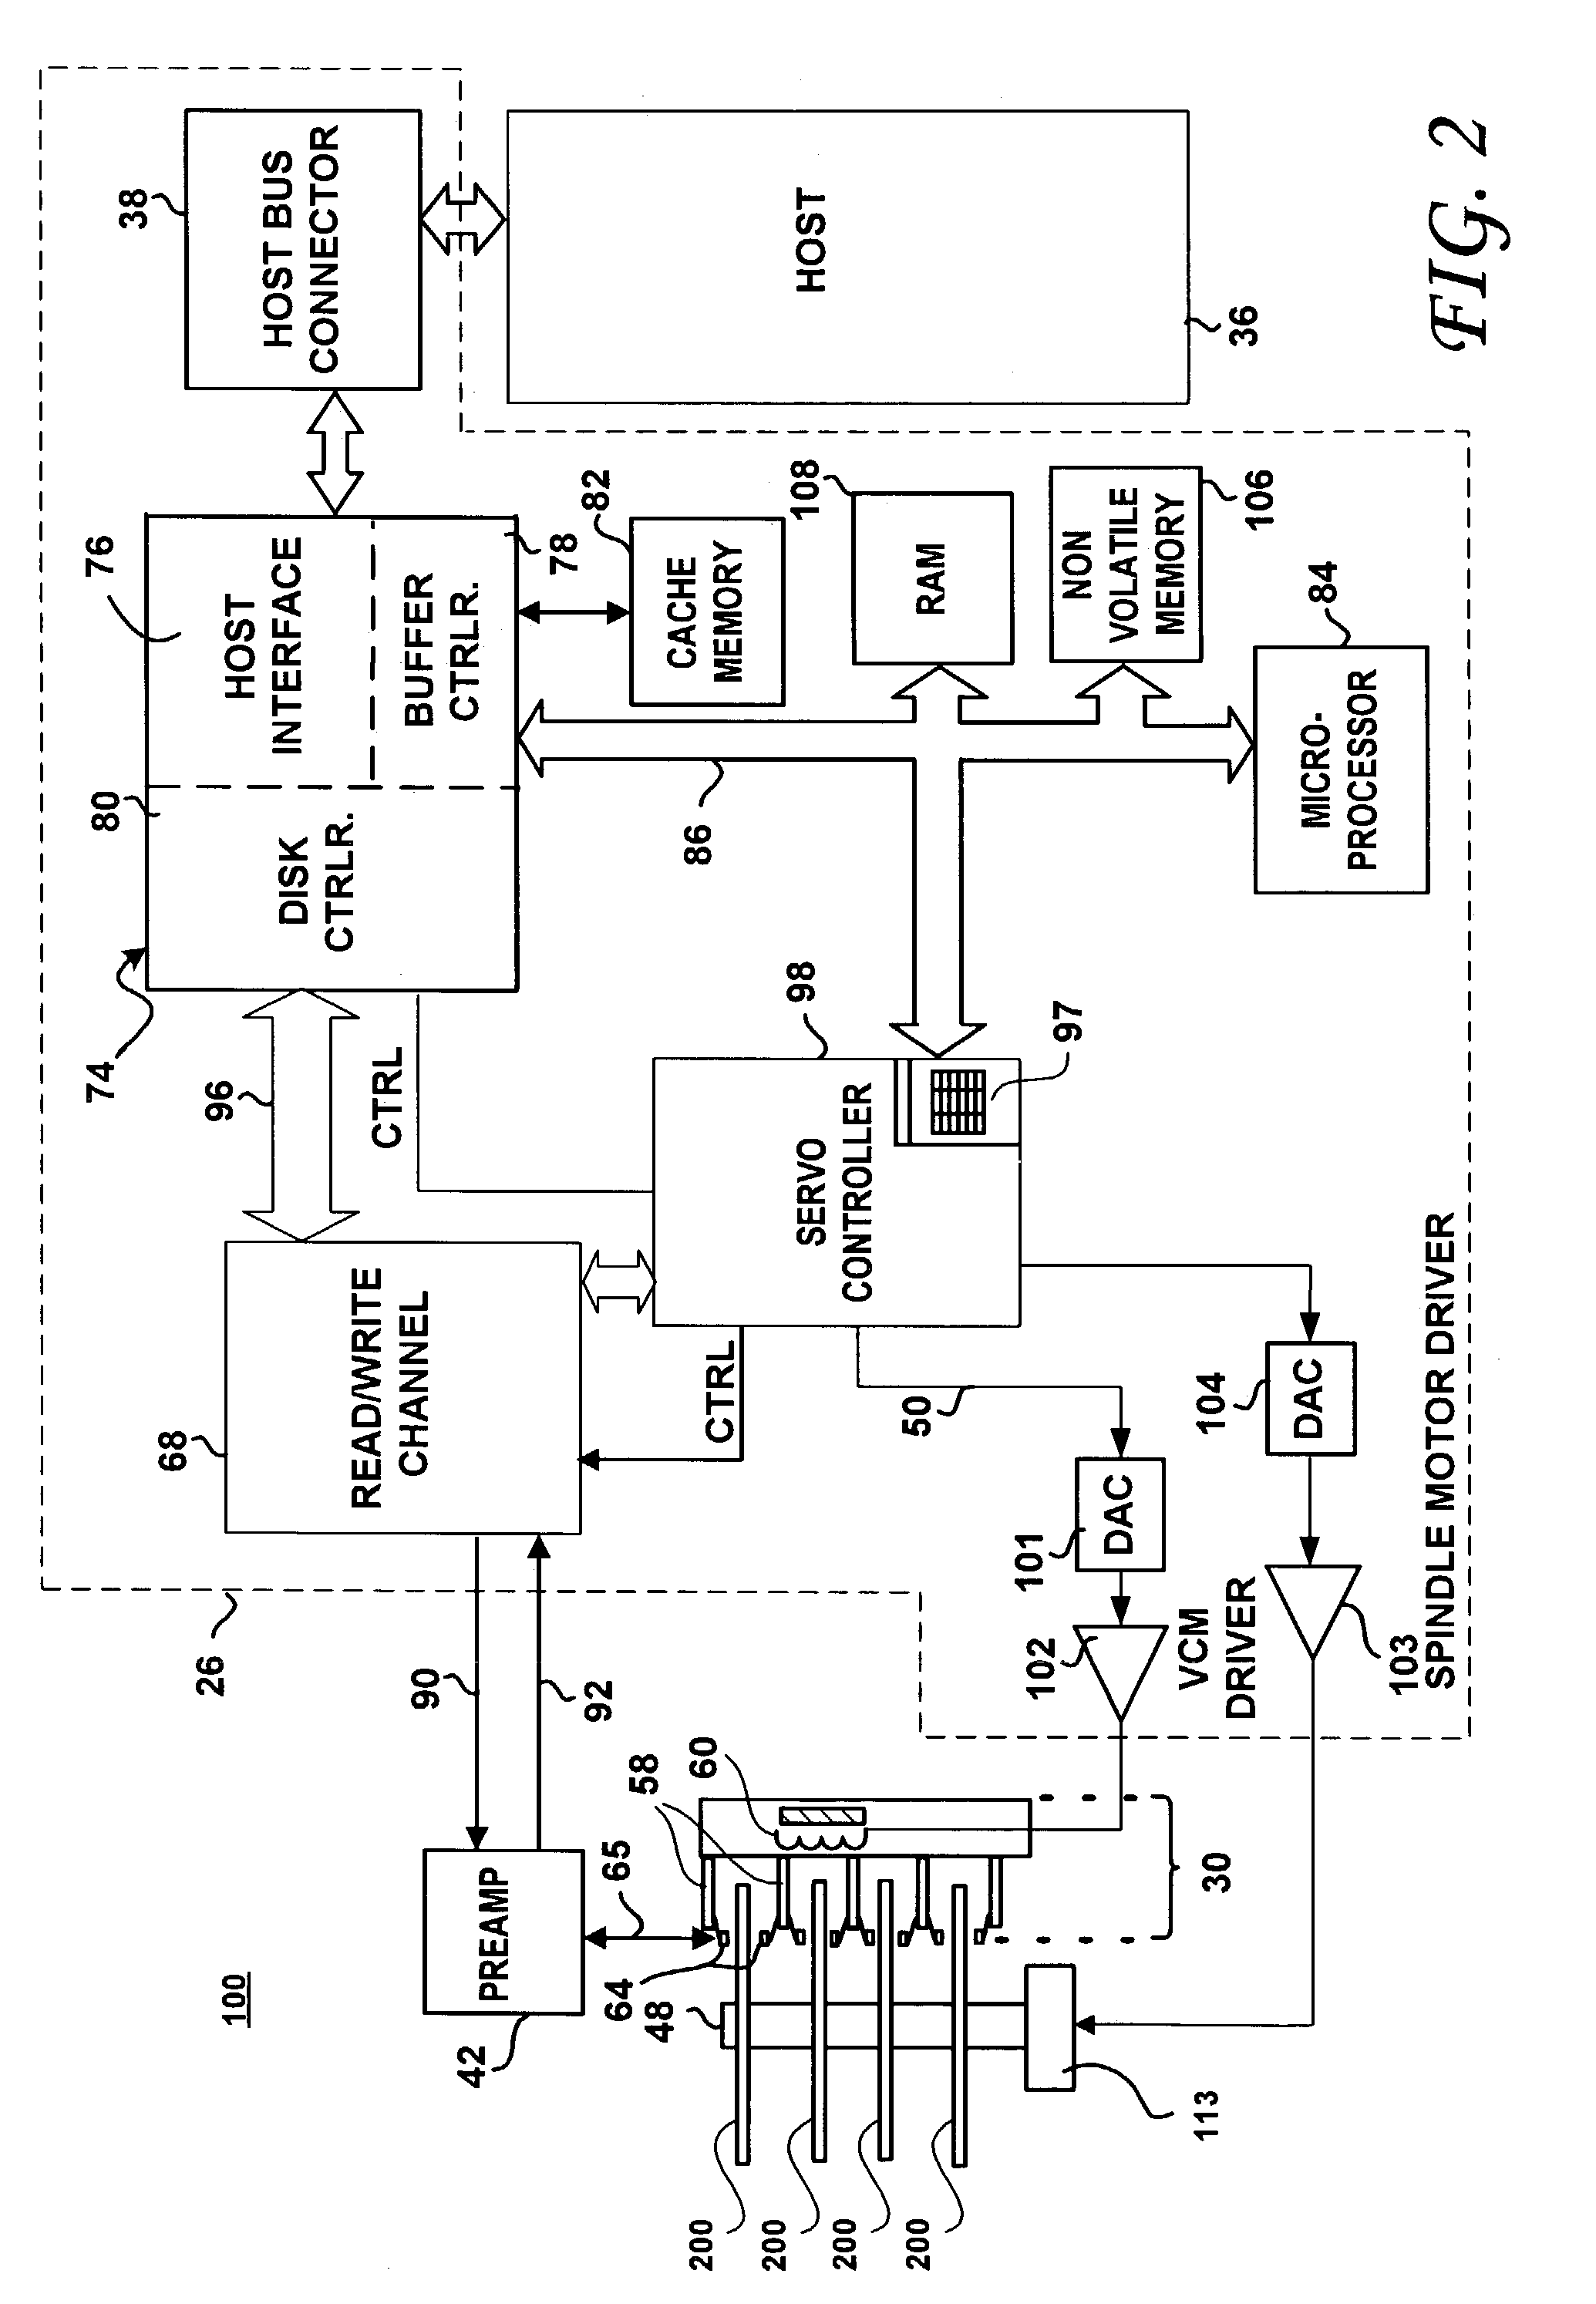 Disk drive and disk drive-containing device having selectively controllable spindle motor spin up profiles